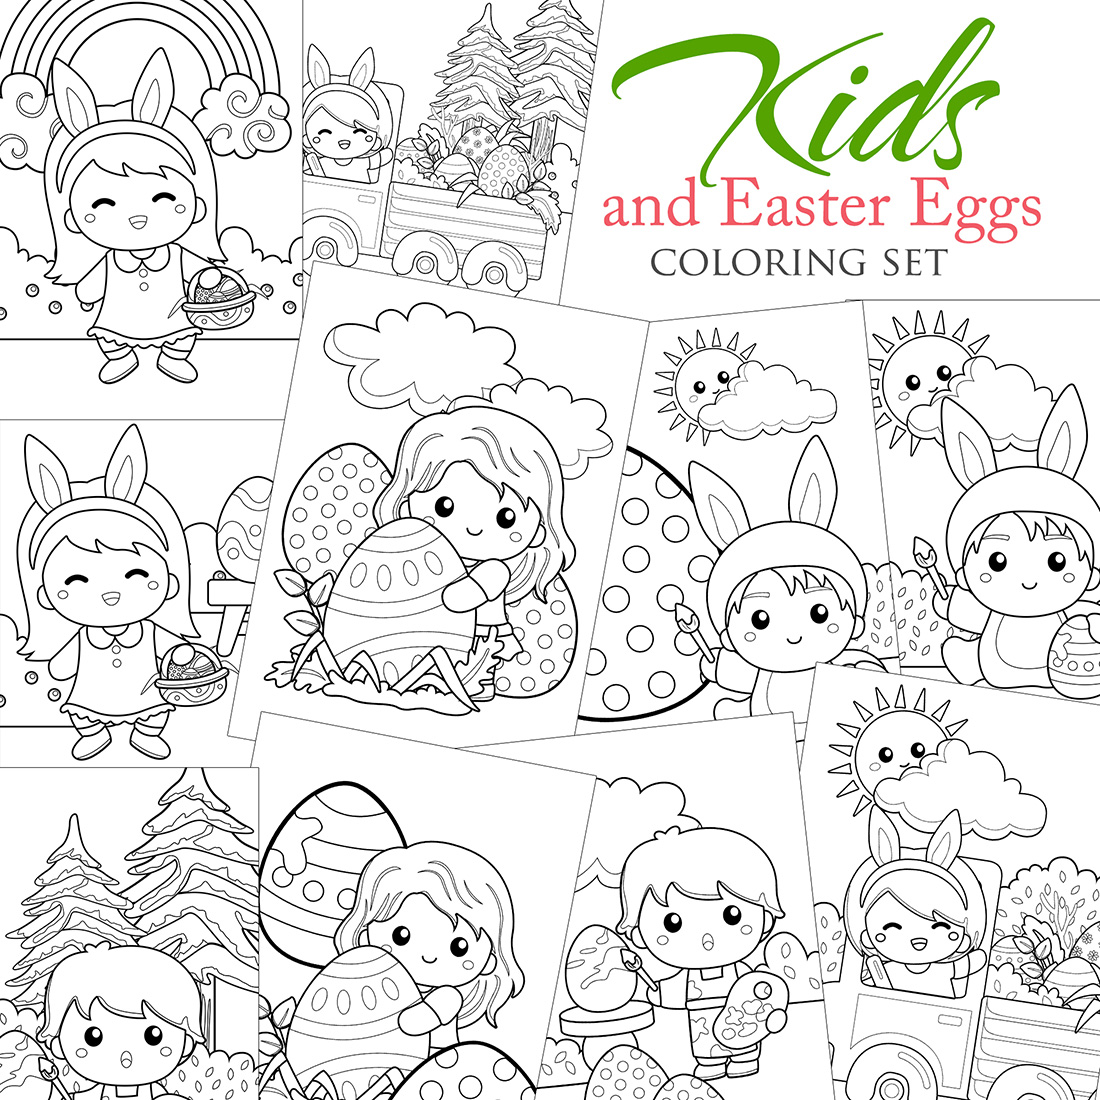 Holiday Easter Eggs Coloring Pages Activity For Kids And Adult cover image.